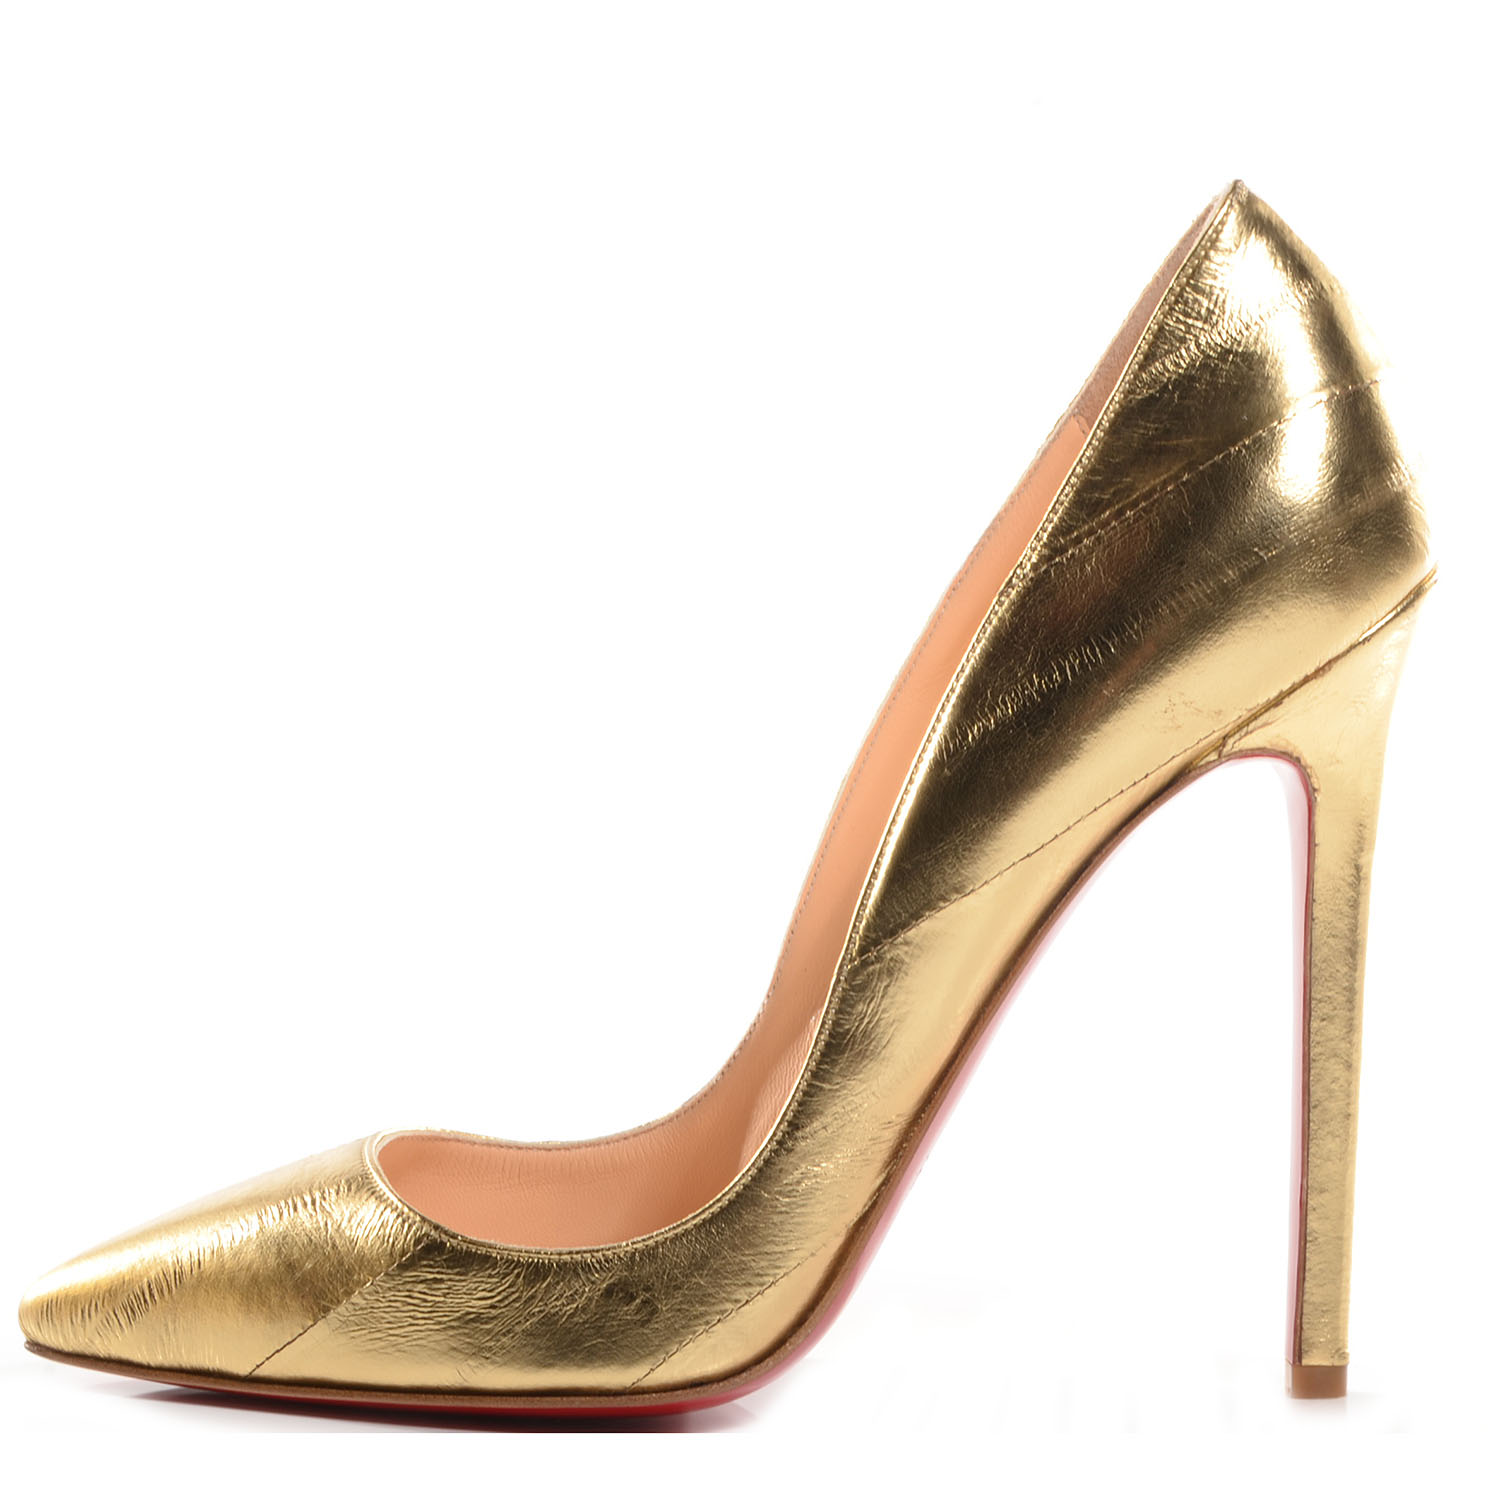 CHRISTIAN LOUBOUTIN Eel Pigalle 120 Pumps 38 Gold 73082